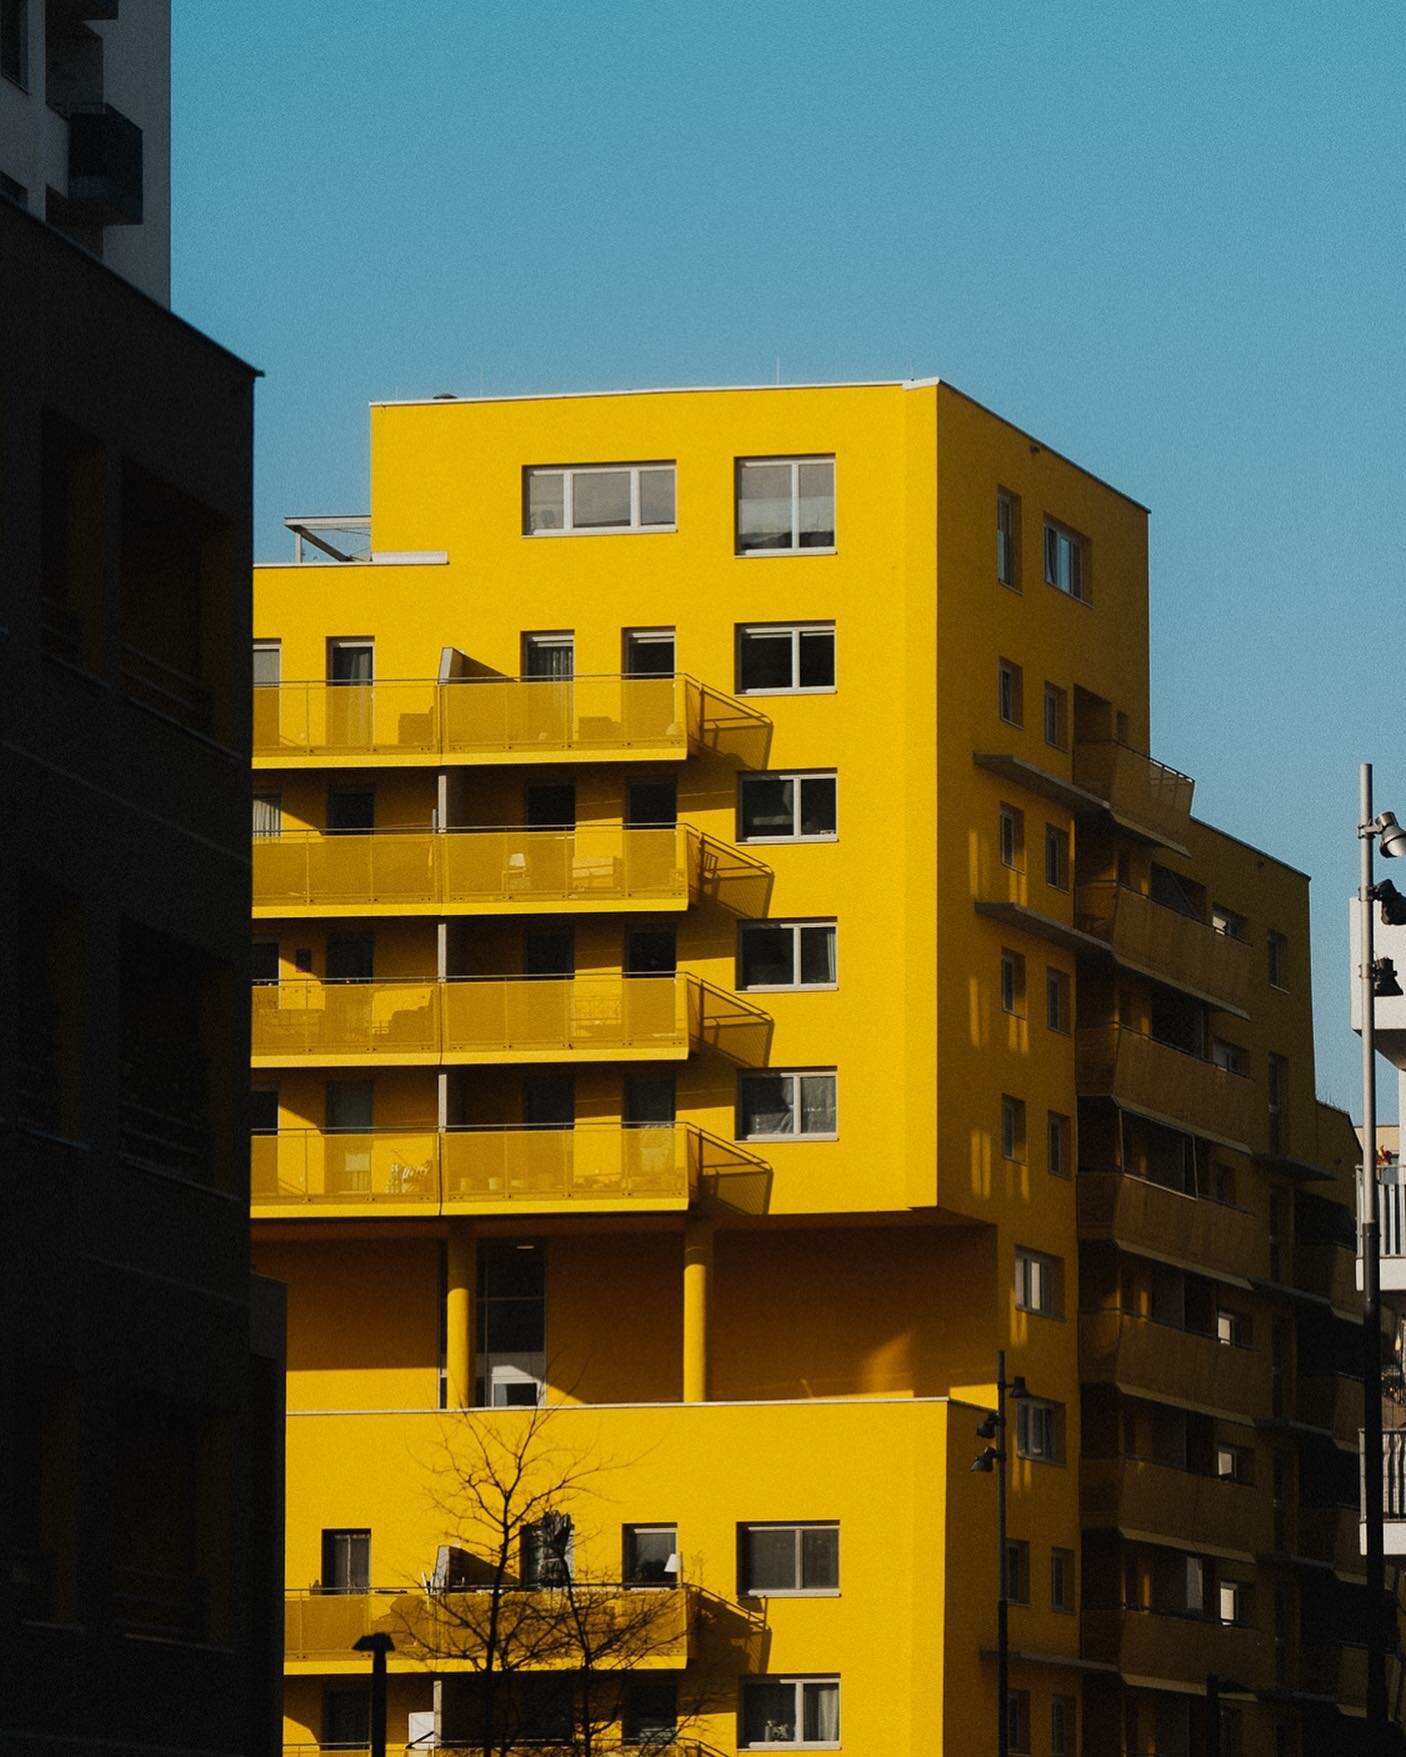 yellow. 🍋
found this super cool looking yellow building on my last walk and had to share a picture of it since i really love the color of this building! 🫠 // #streetphotography #yellowhouse #architecture